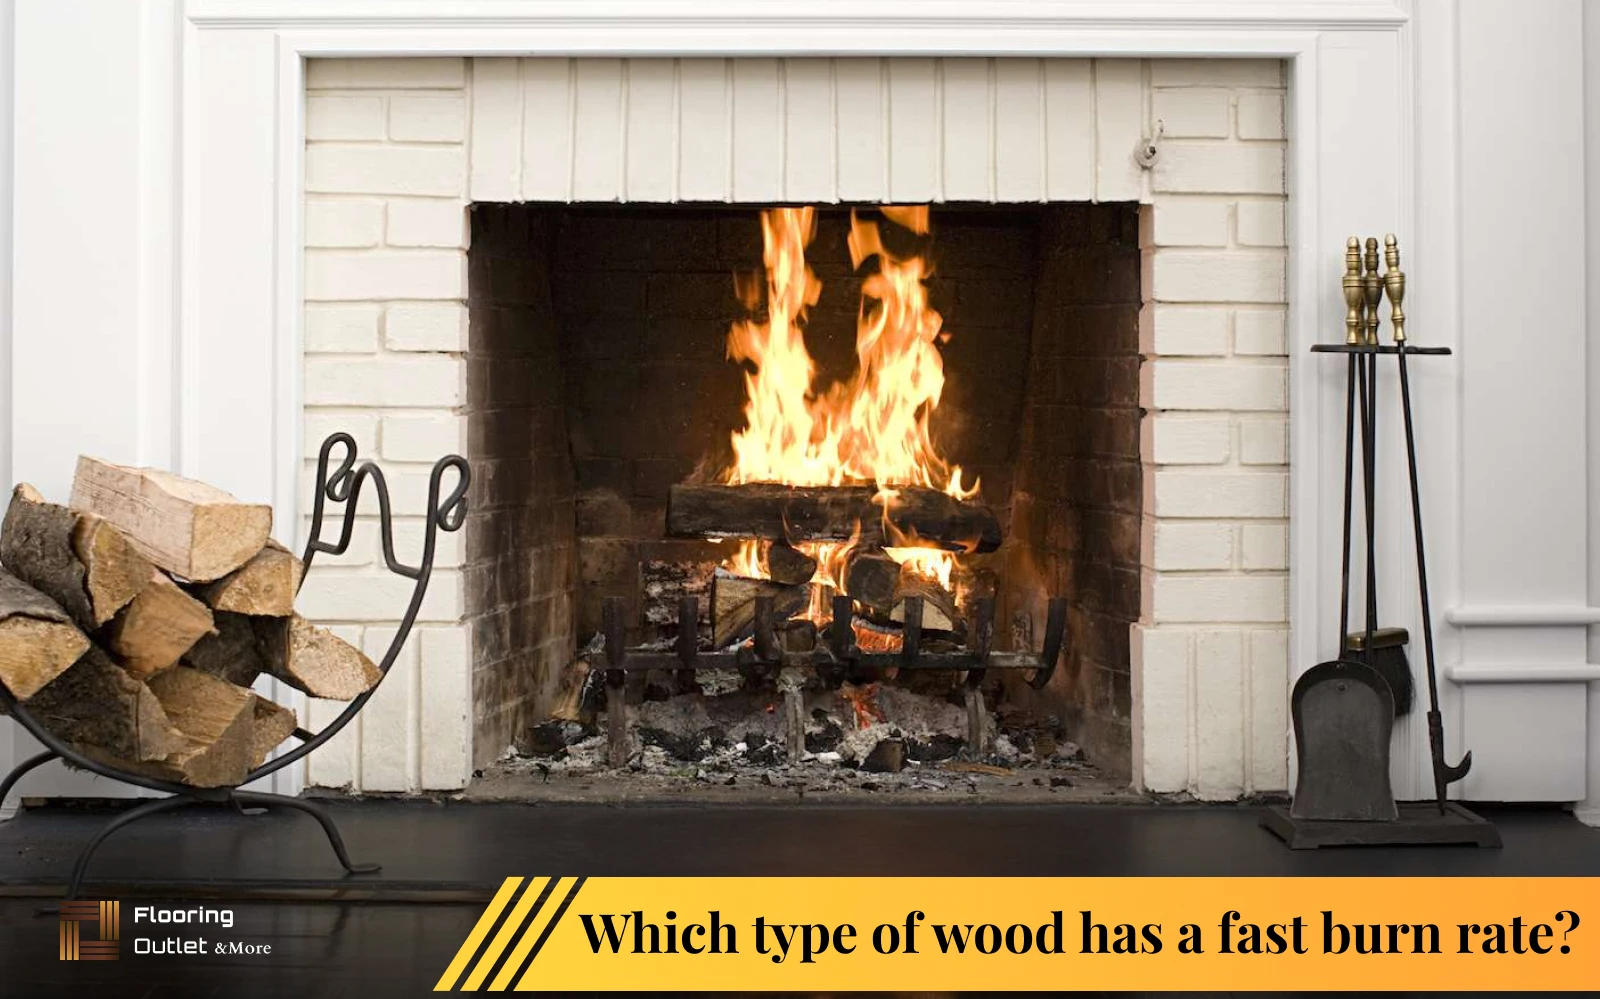 Which type of wood has a fast burn rate?